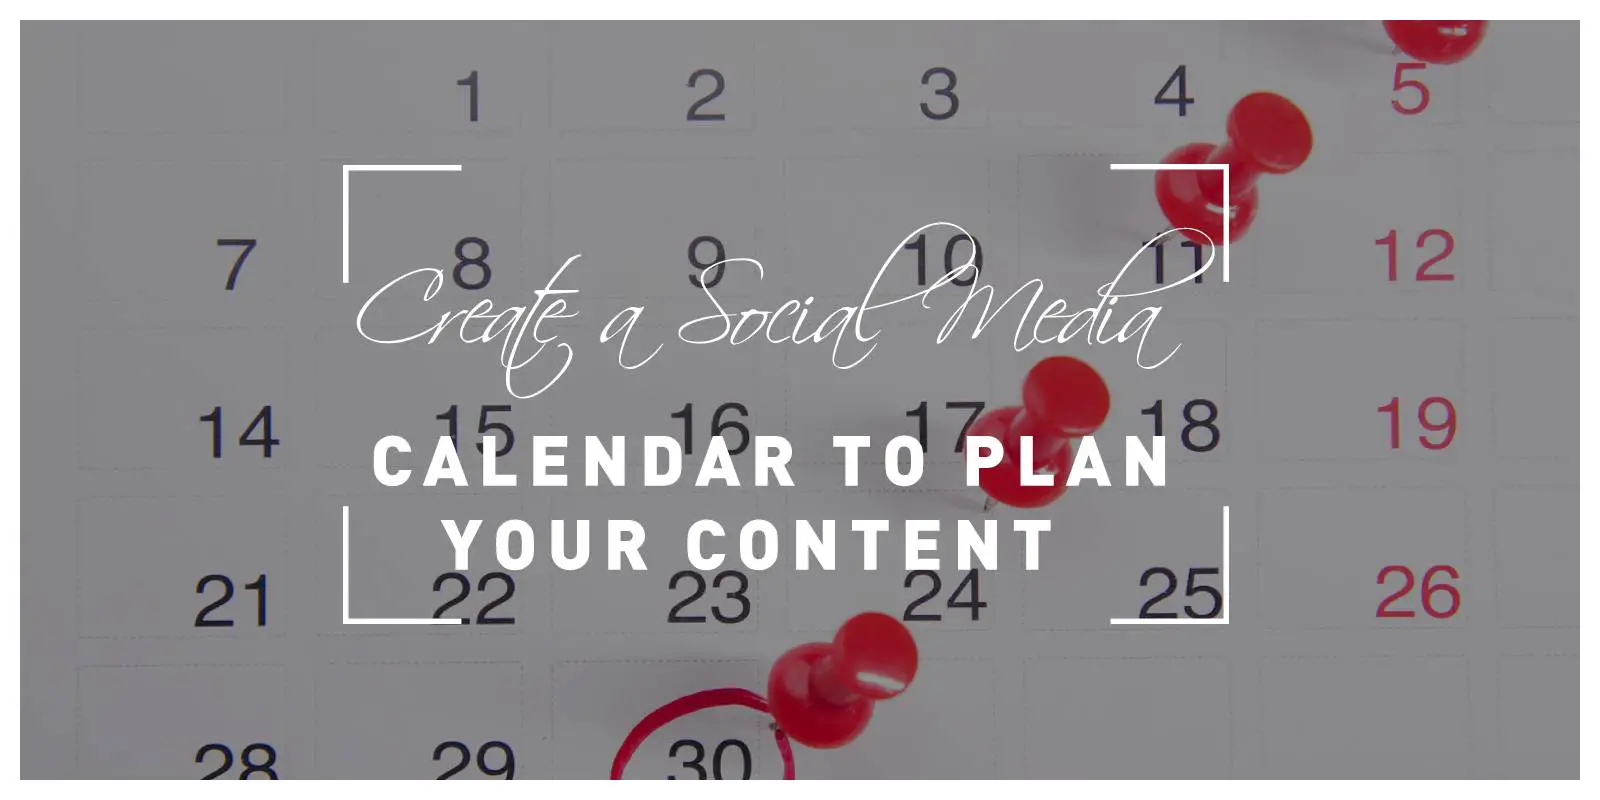 how to create a social media calendar to plan your content